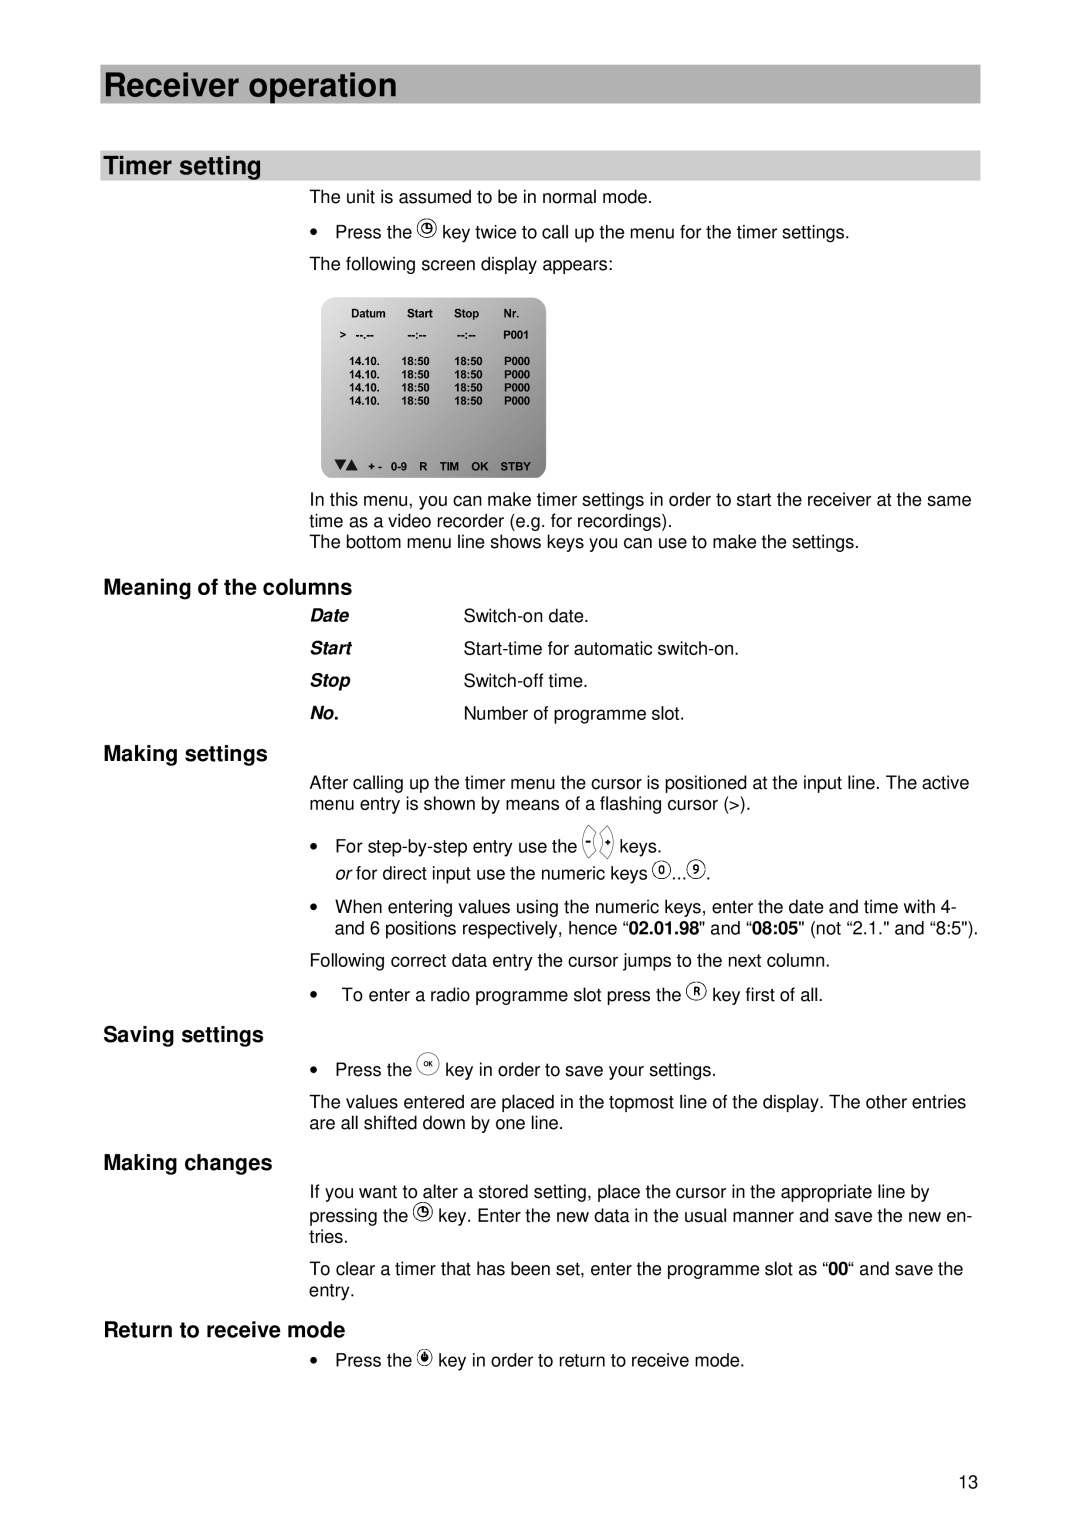 Kathrein UFD 430 manual Timer setting, Meaning of the columns, Making settings, Saving settings, Making changes 